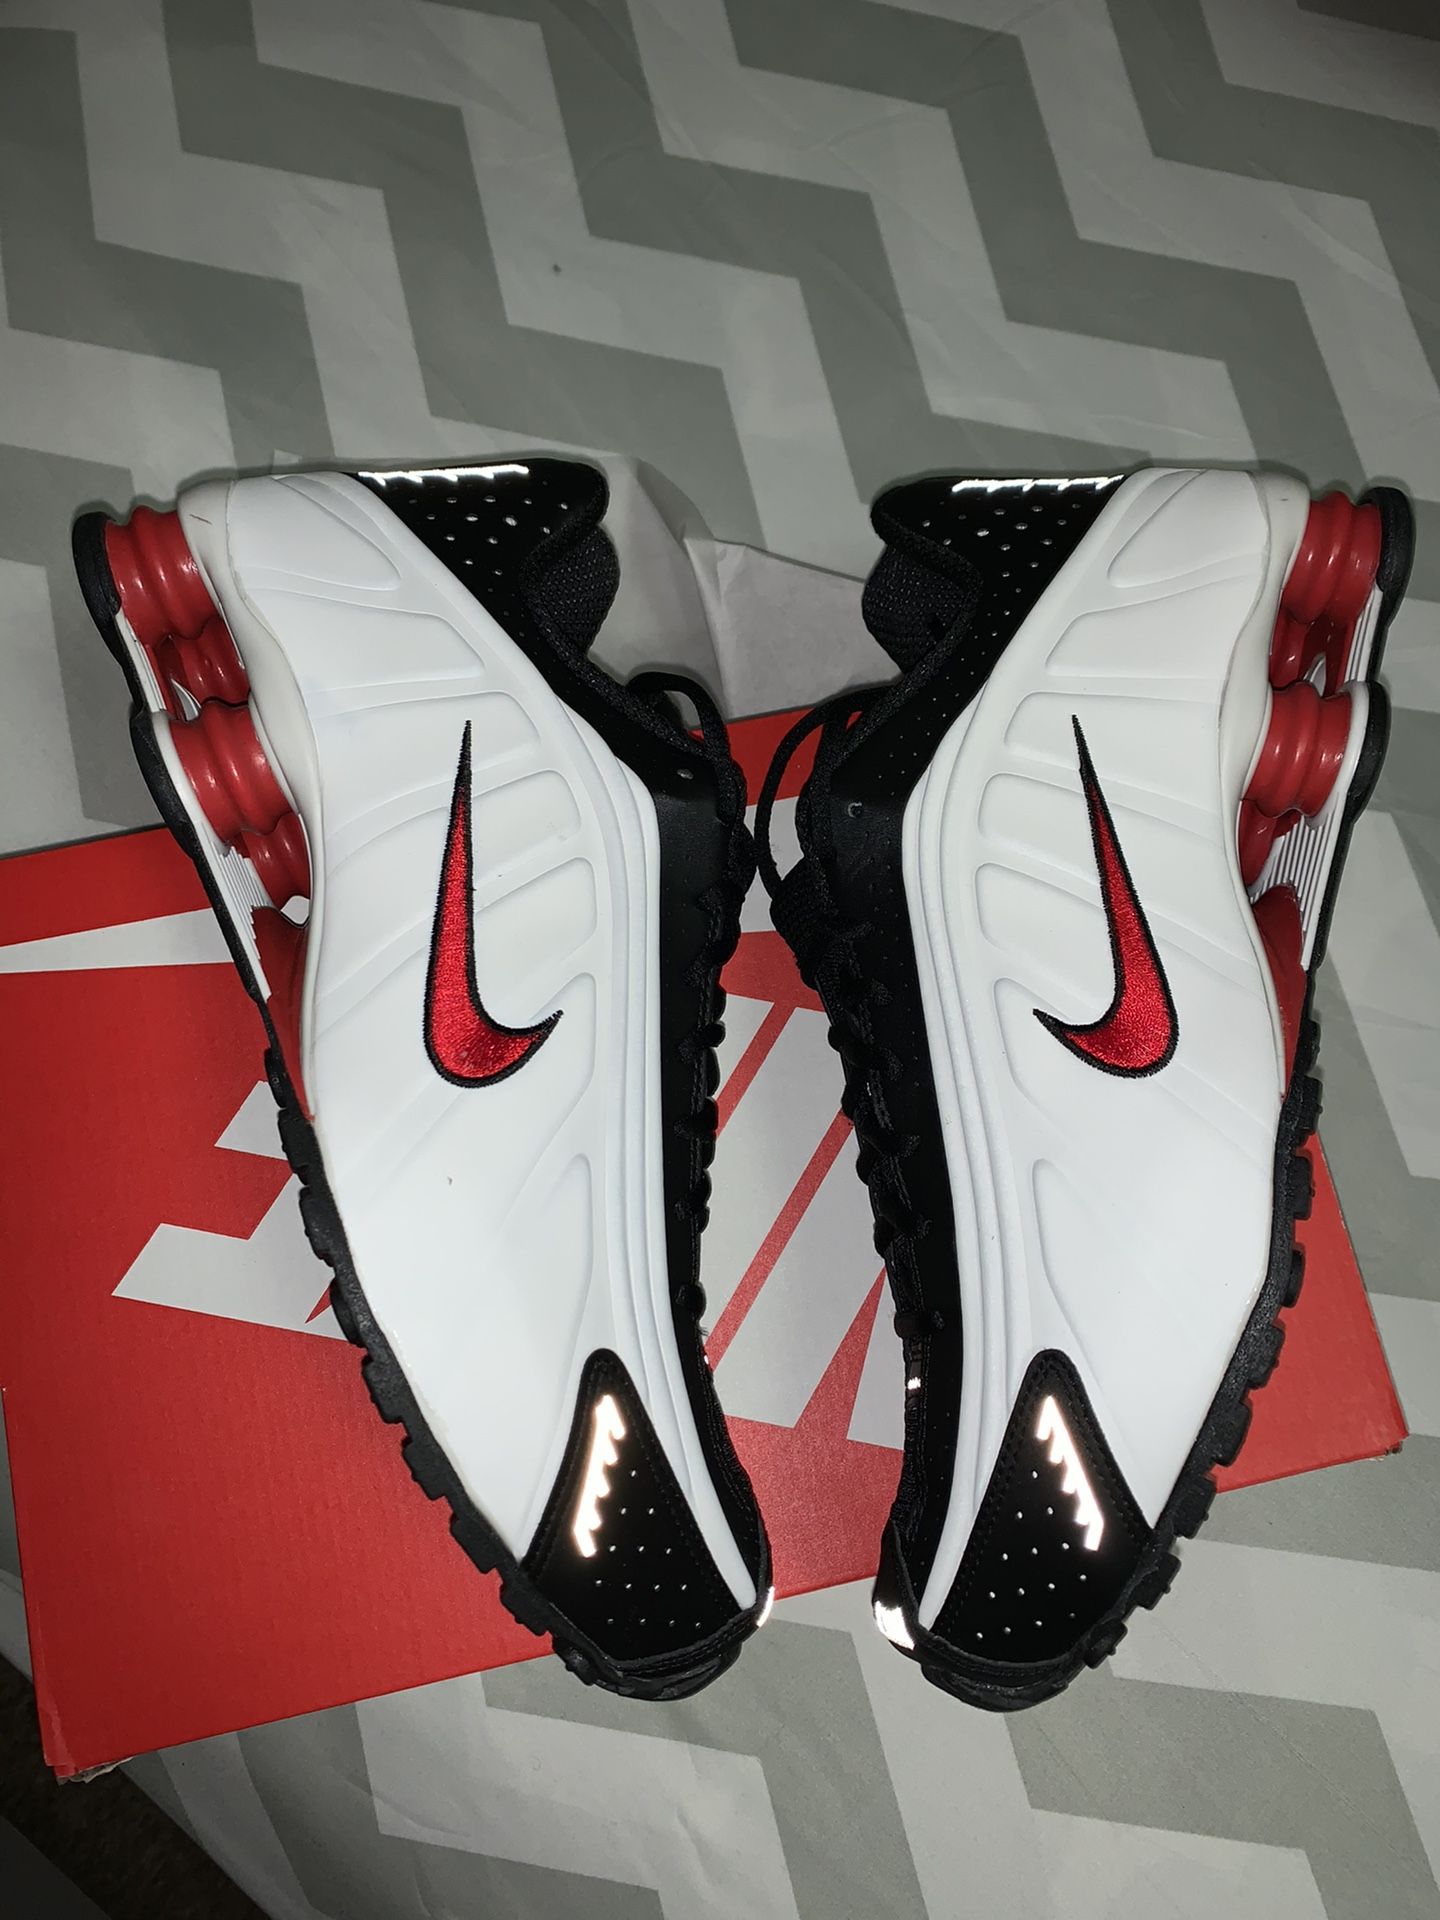 Brand new men’s Air Nike Shox shoes size 12, 11.5, 11 ,10.5,10,9.5,9 and 8.5 available price is firm